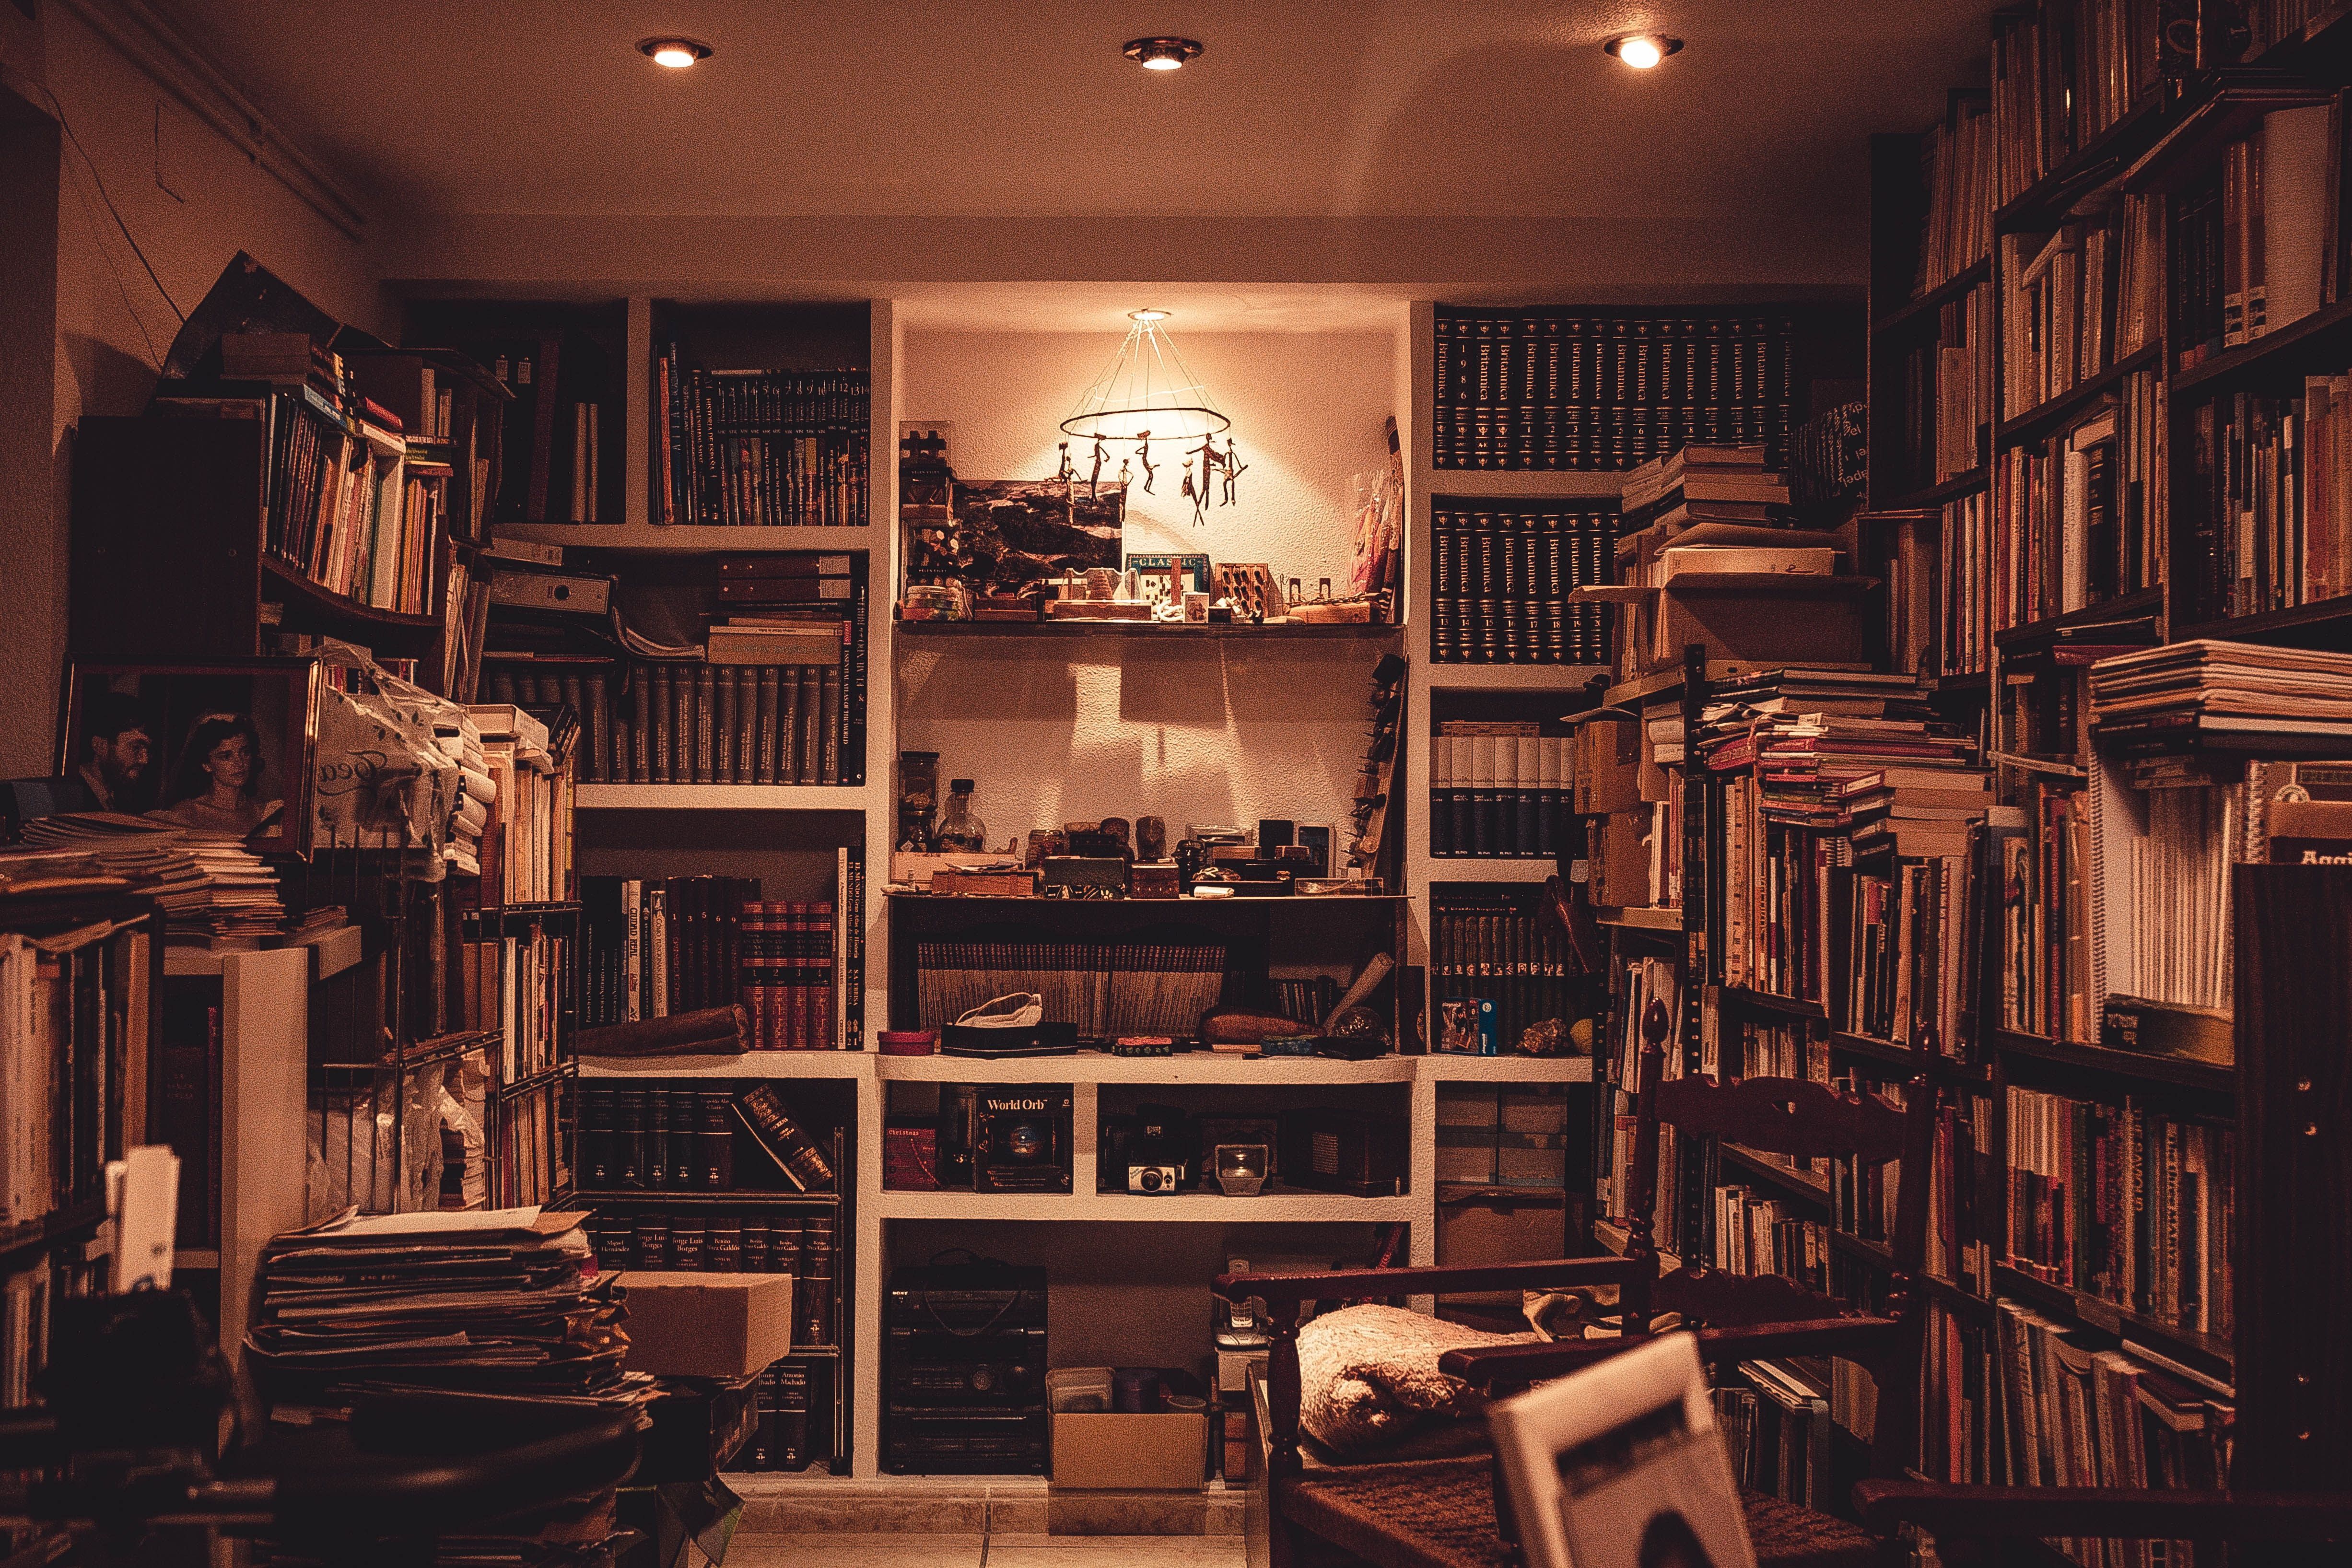 A room with many books on the shelves - Bookshelf, library